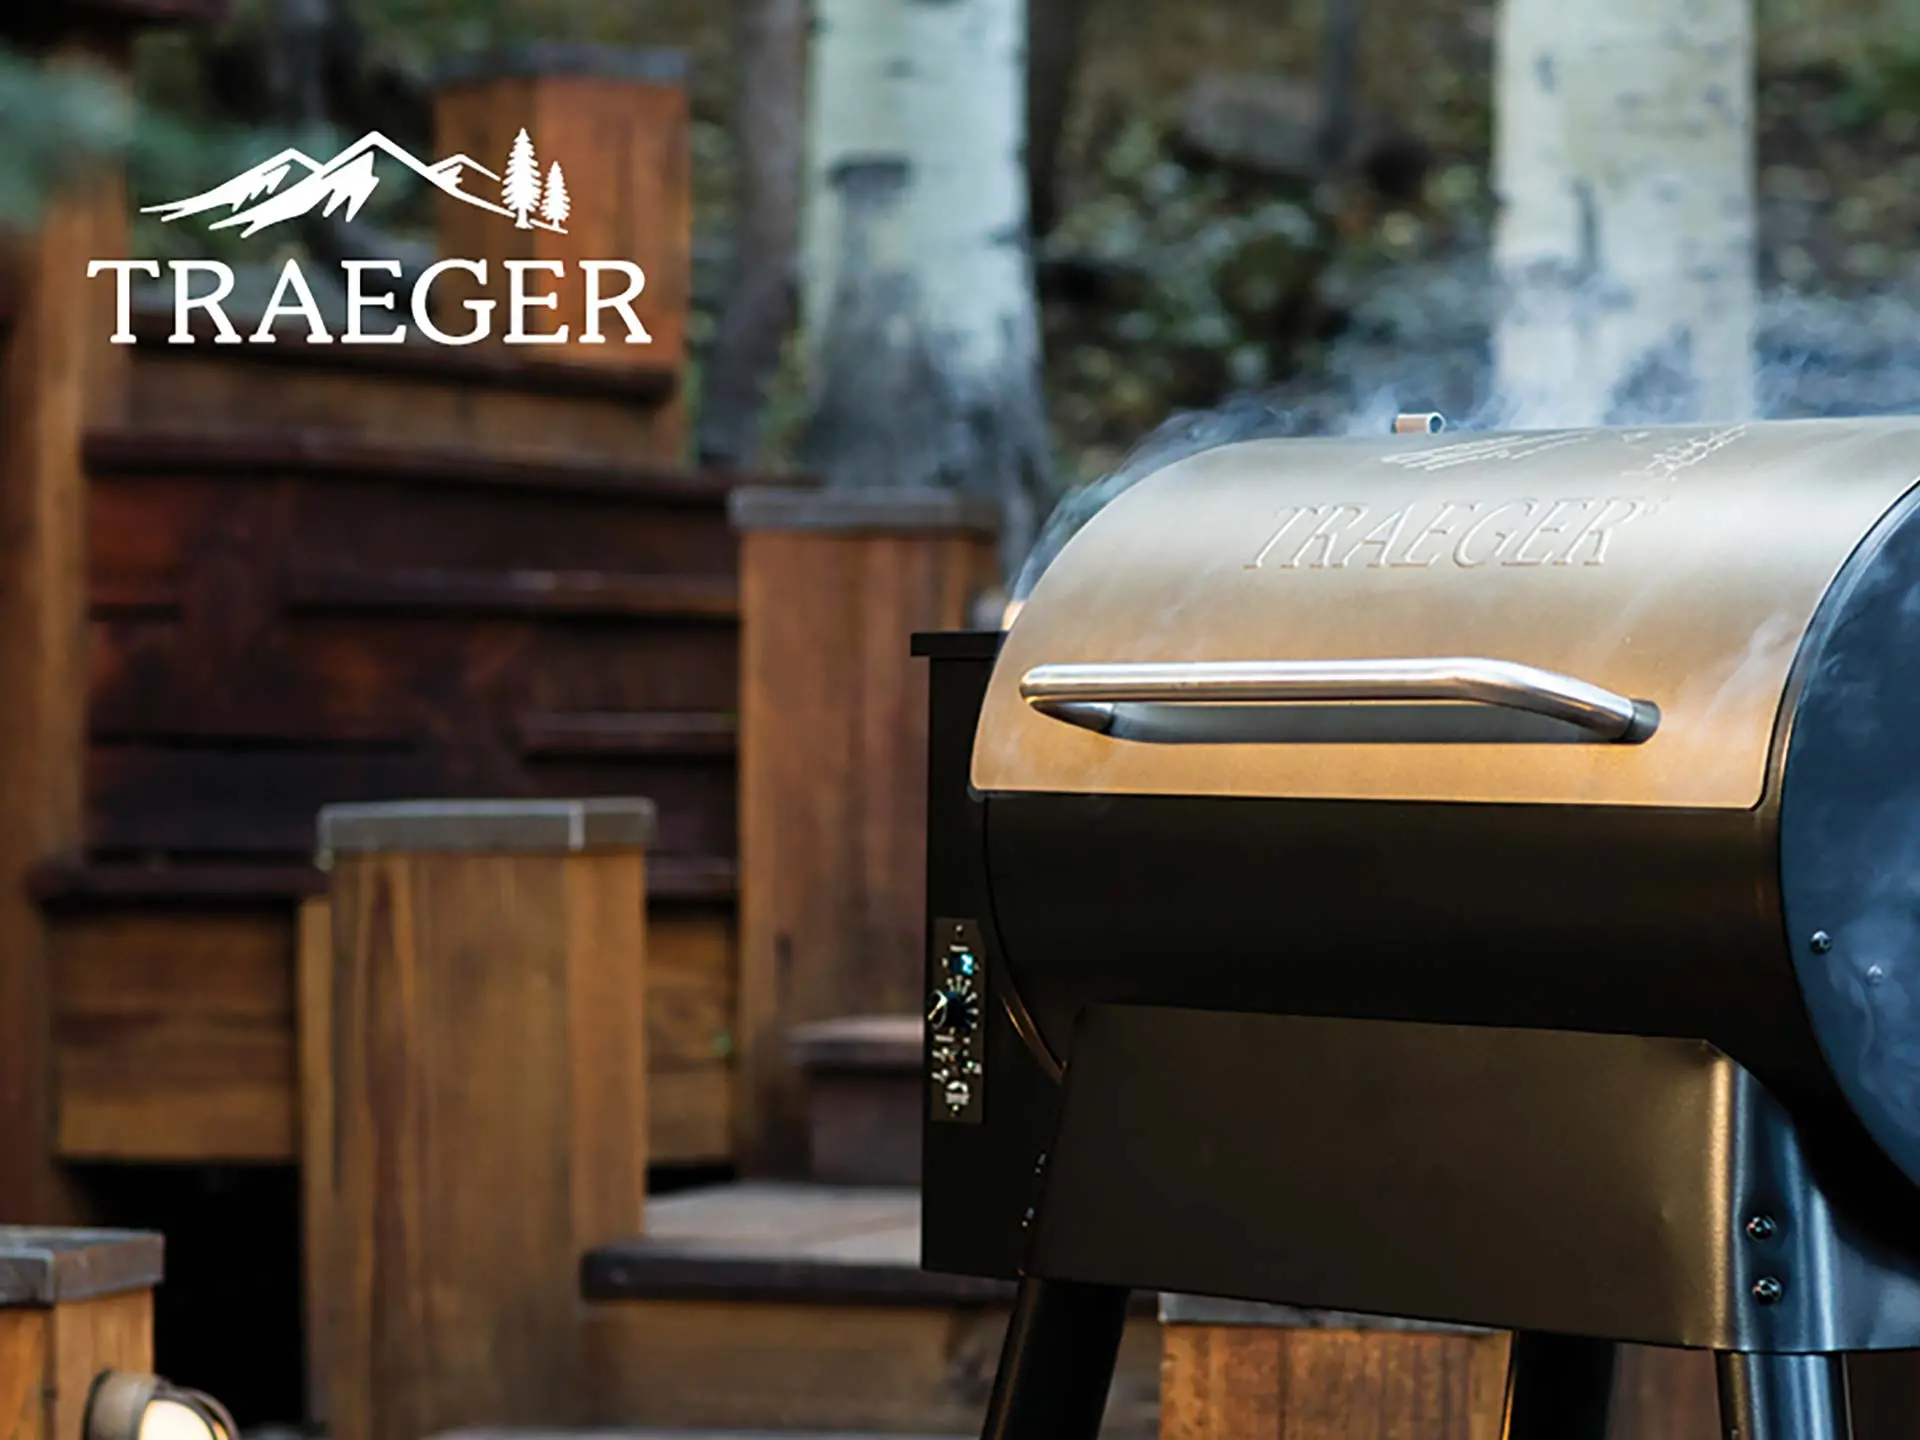 Traeger Grills | Optimizing to Support Connected Products